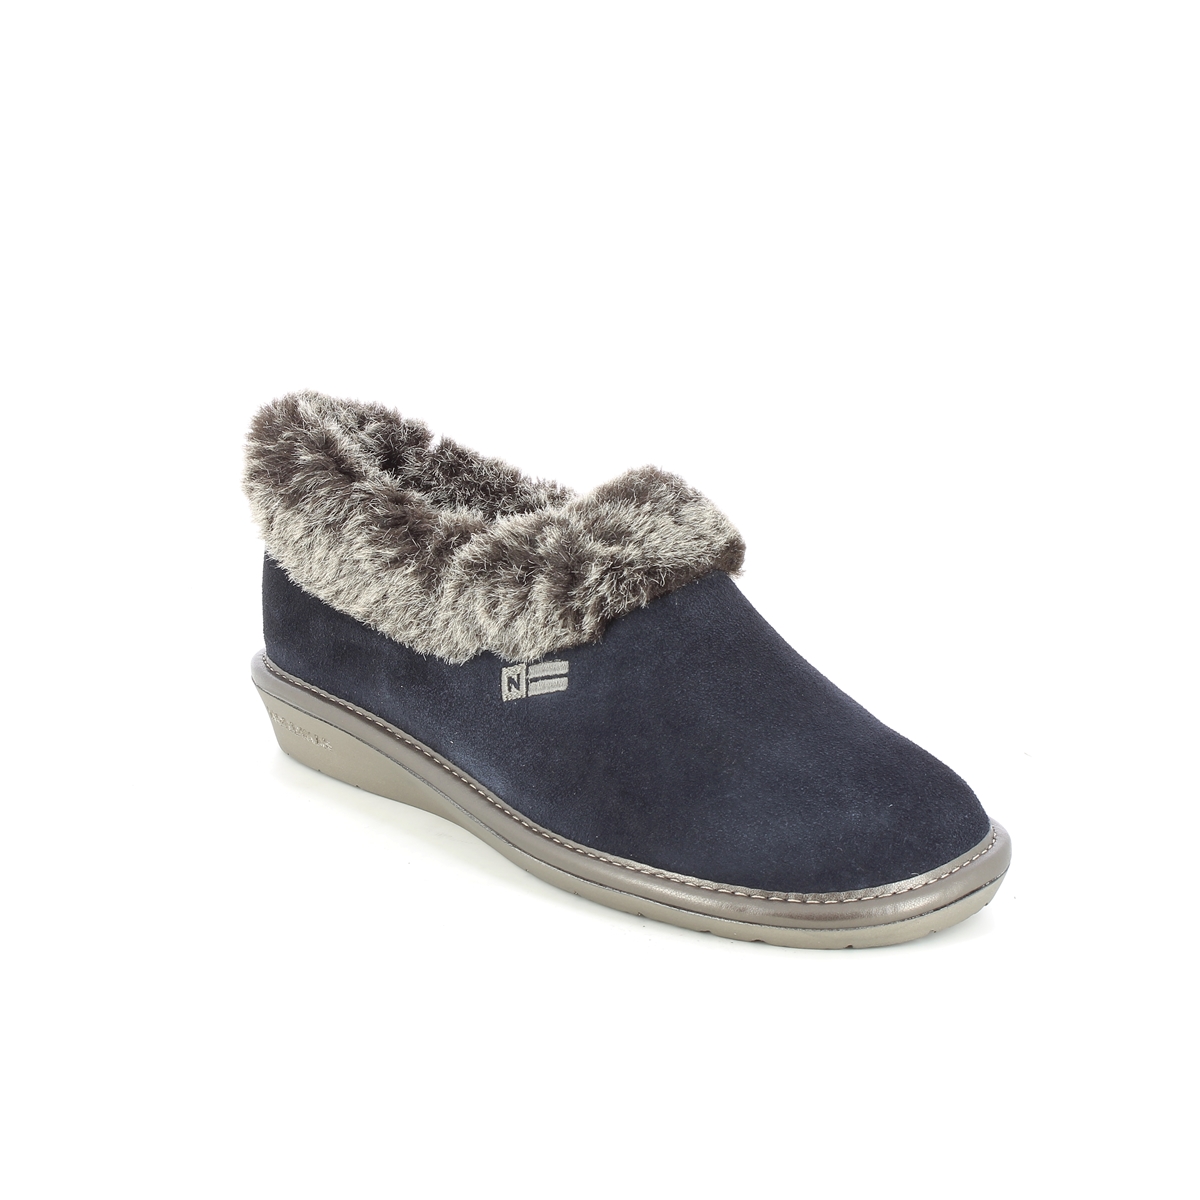 Nordikas Toasty Fur Navy Suede Womens Slippers 1358-4O In Size 38 In Plain Navy Suede